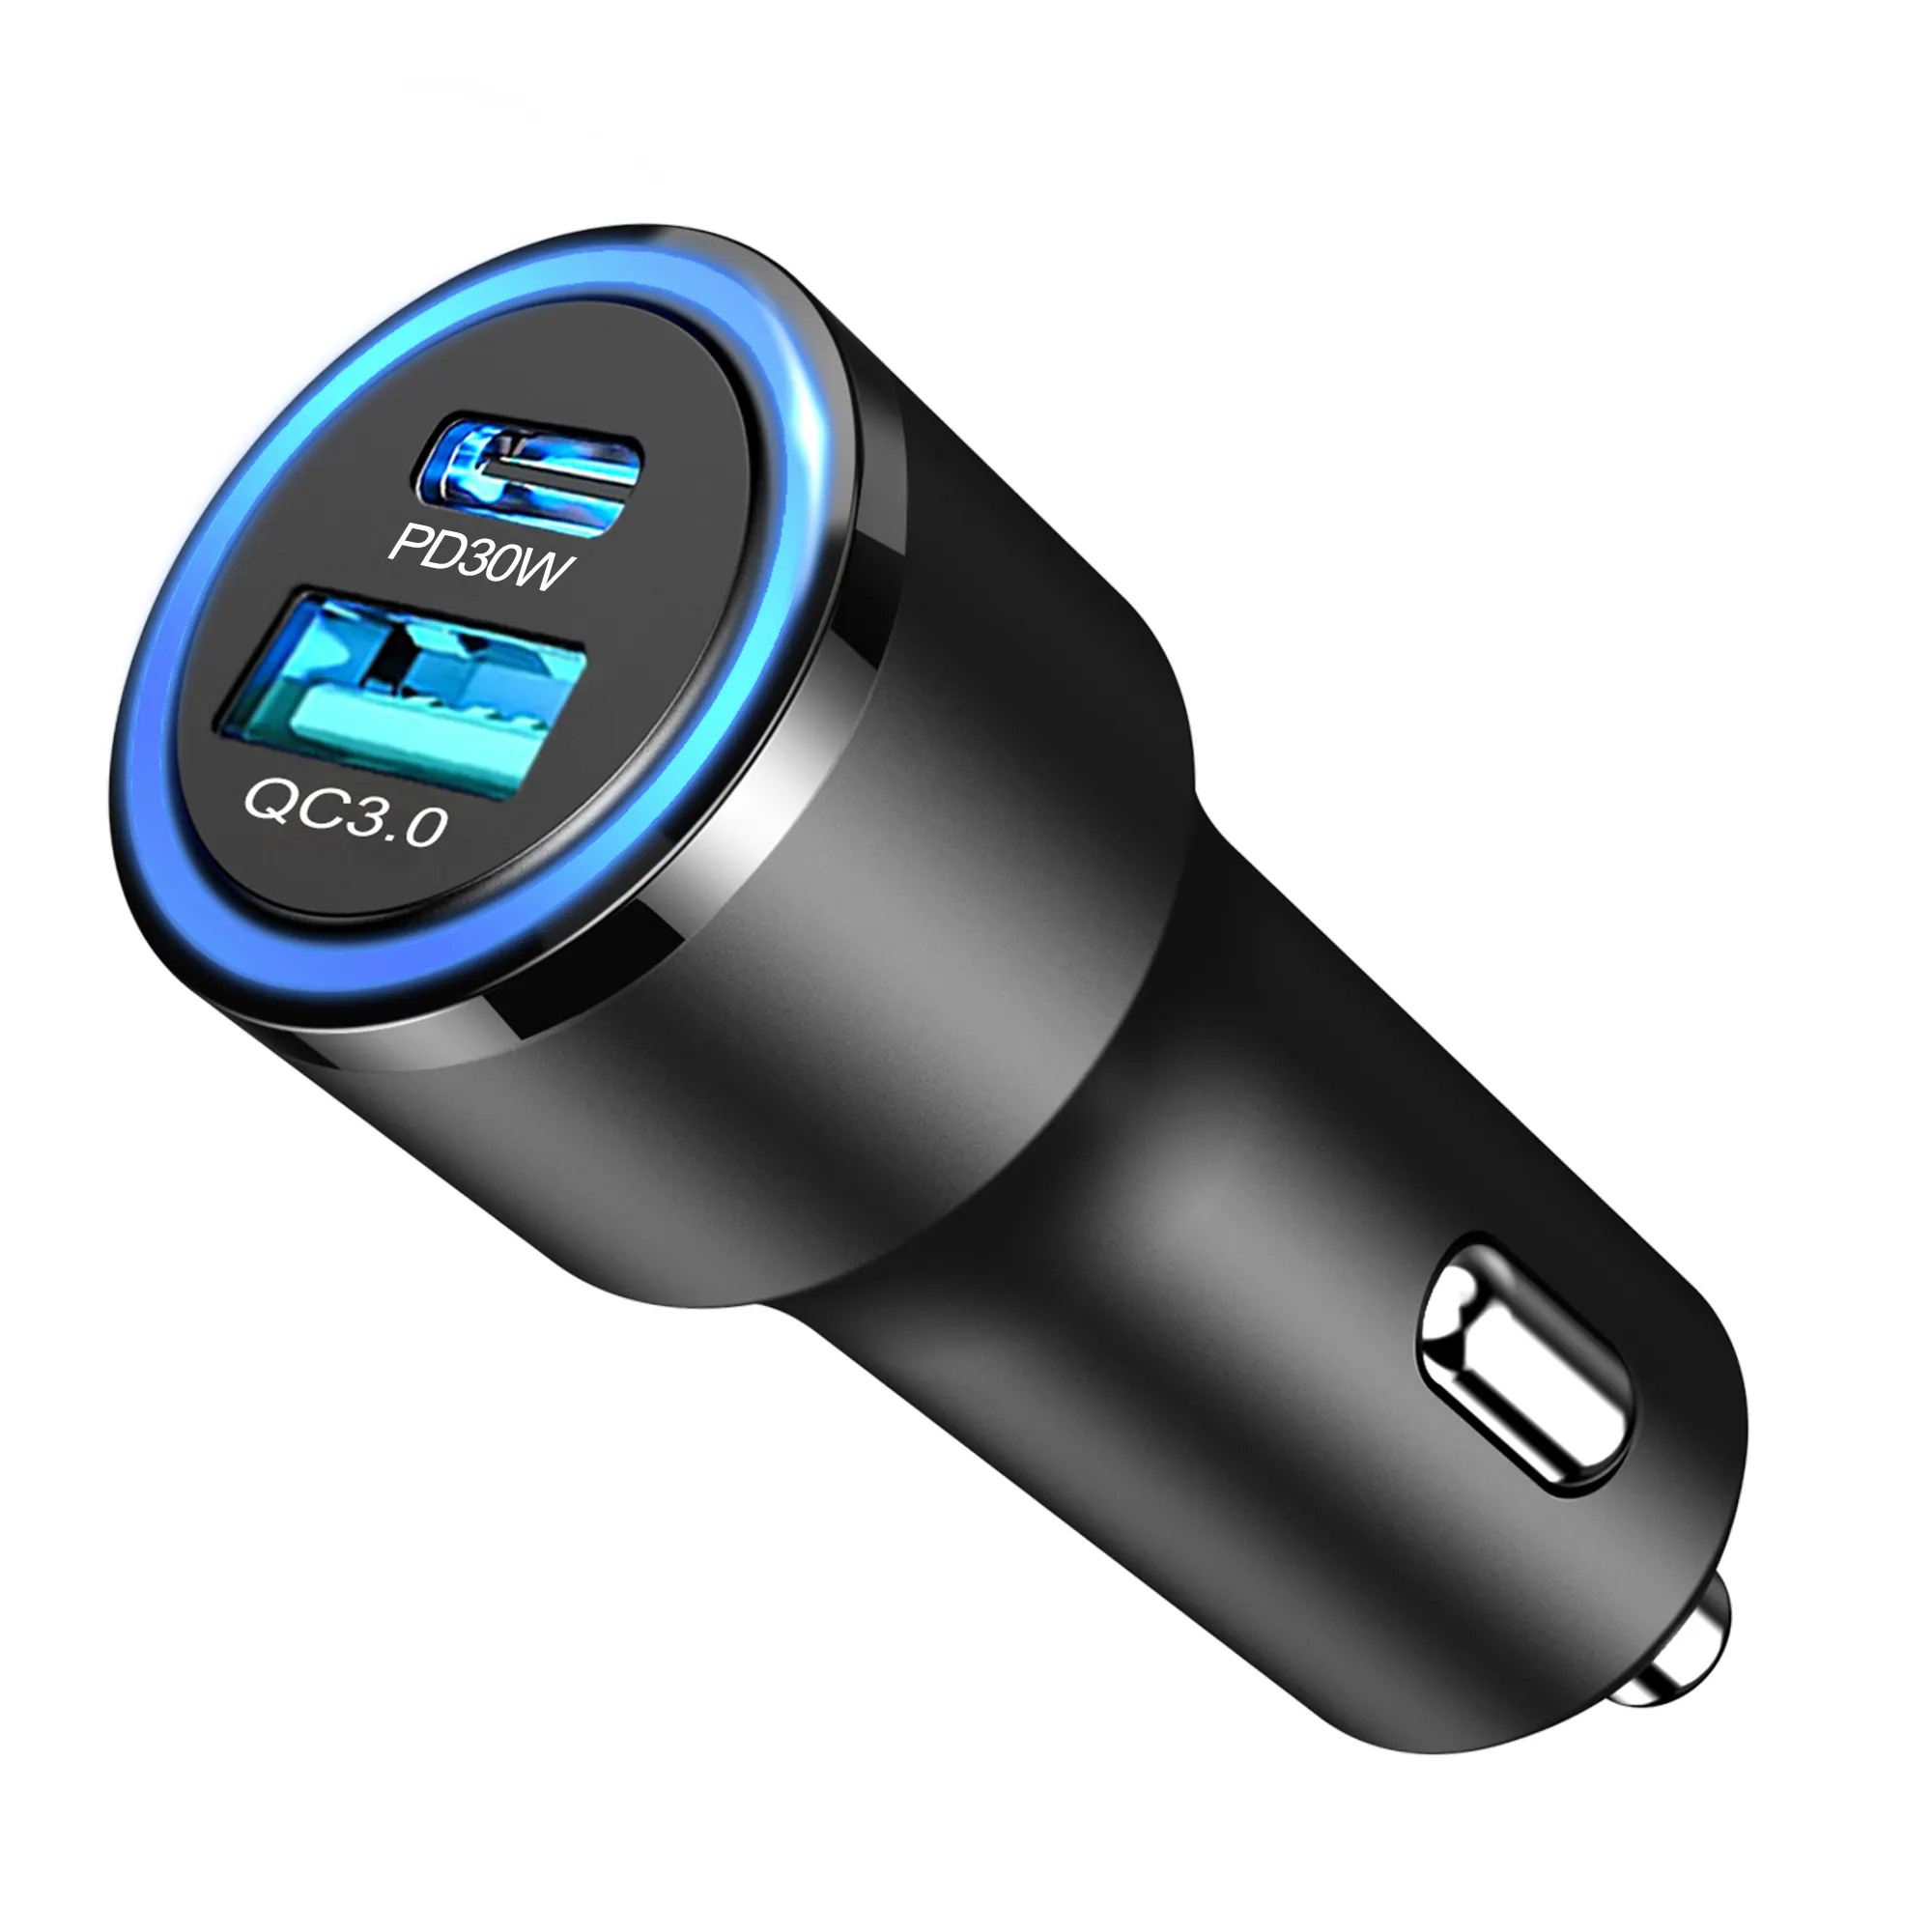 New arrivals Car Charging Accessories Dual Usb Car Charger Adapter PD30W QC3.0 Usb Port 3.1a Smart Car Charger For Iphone Mobile